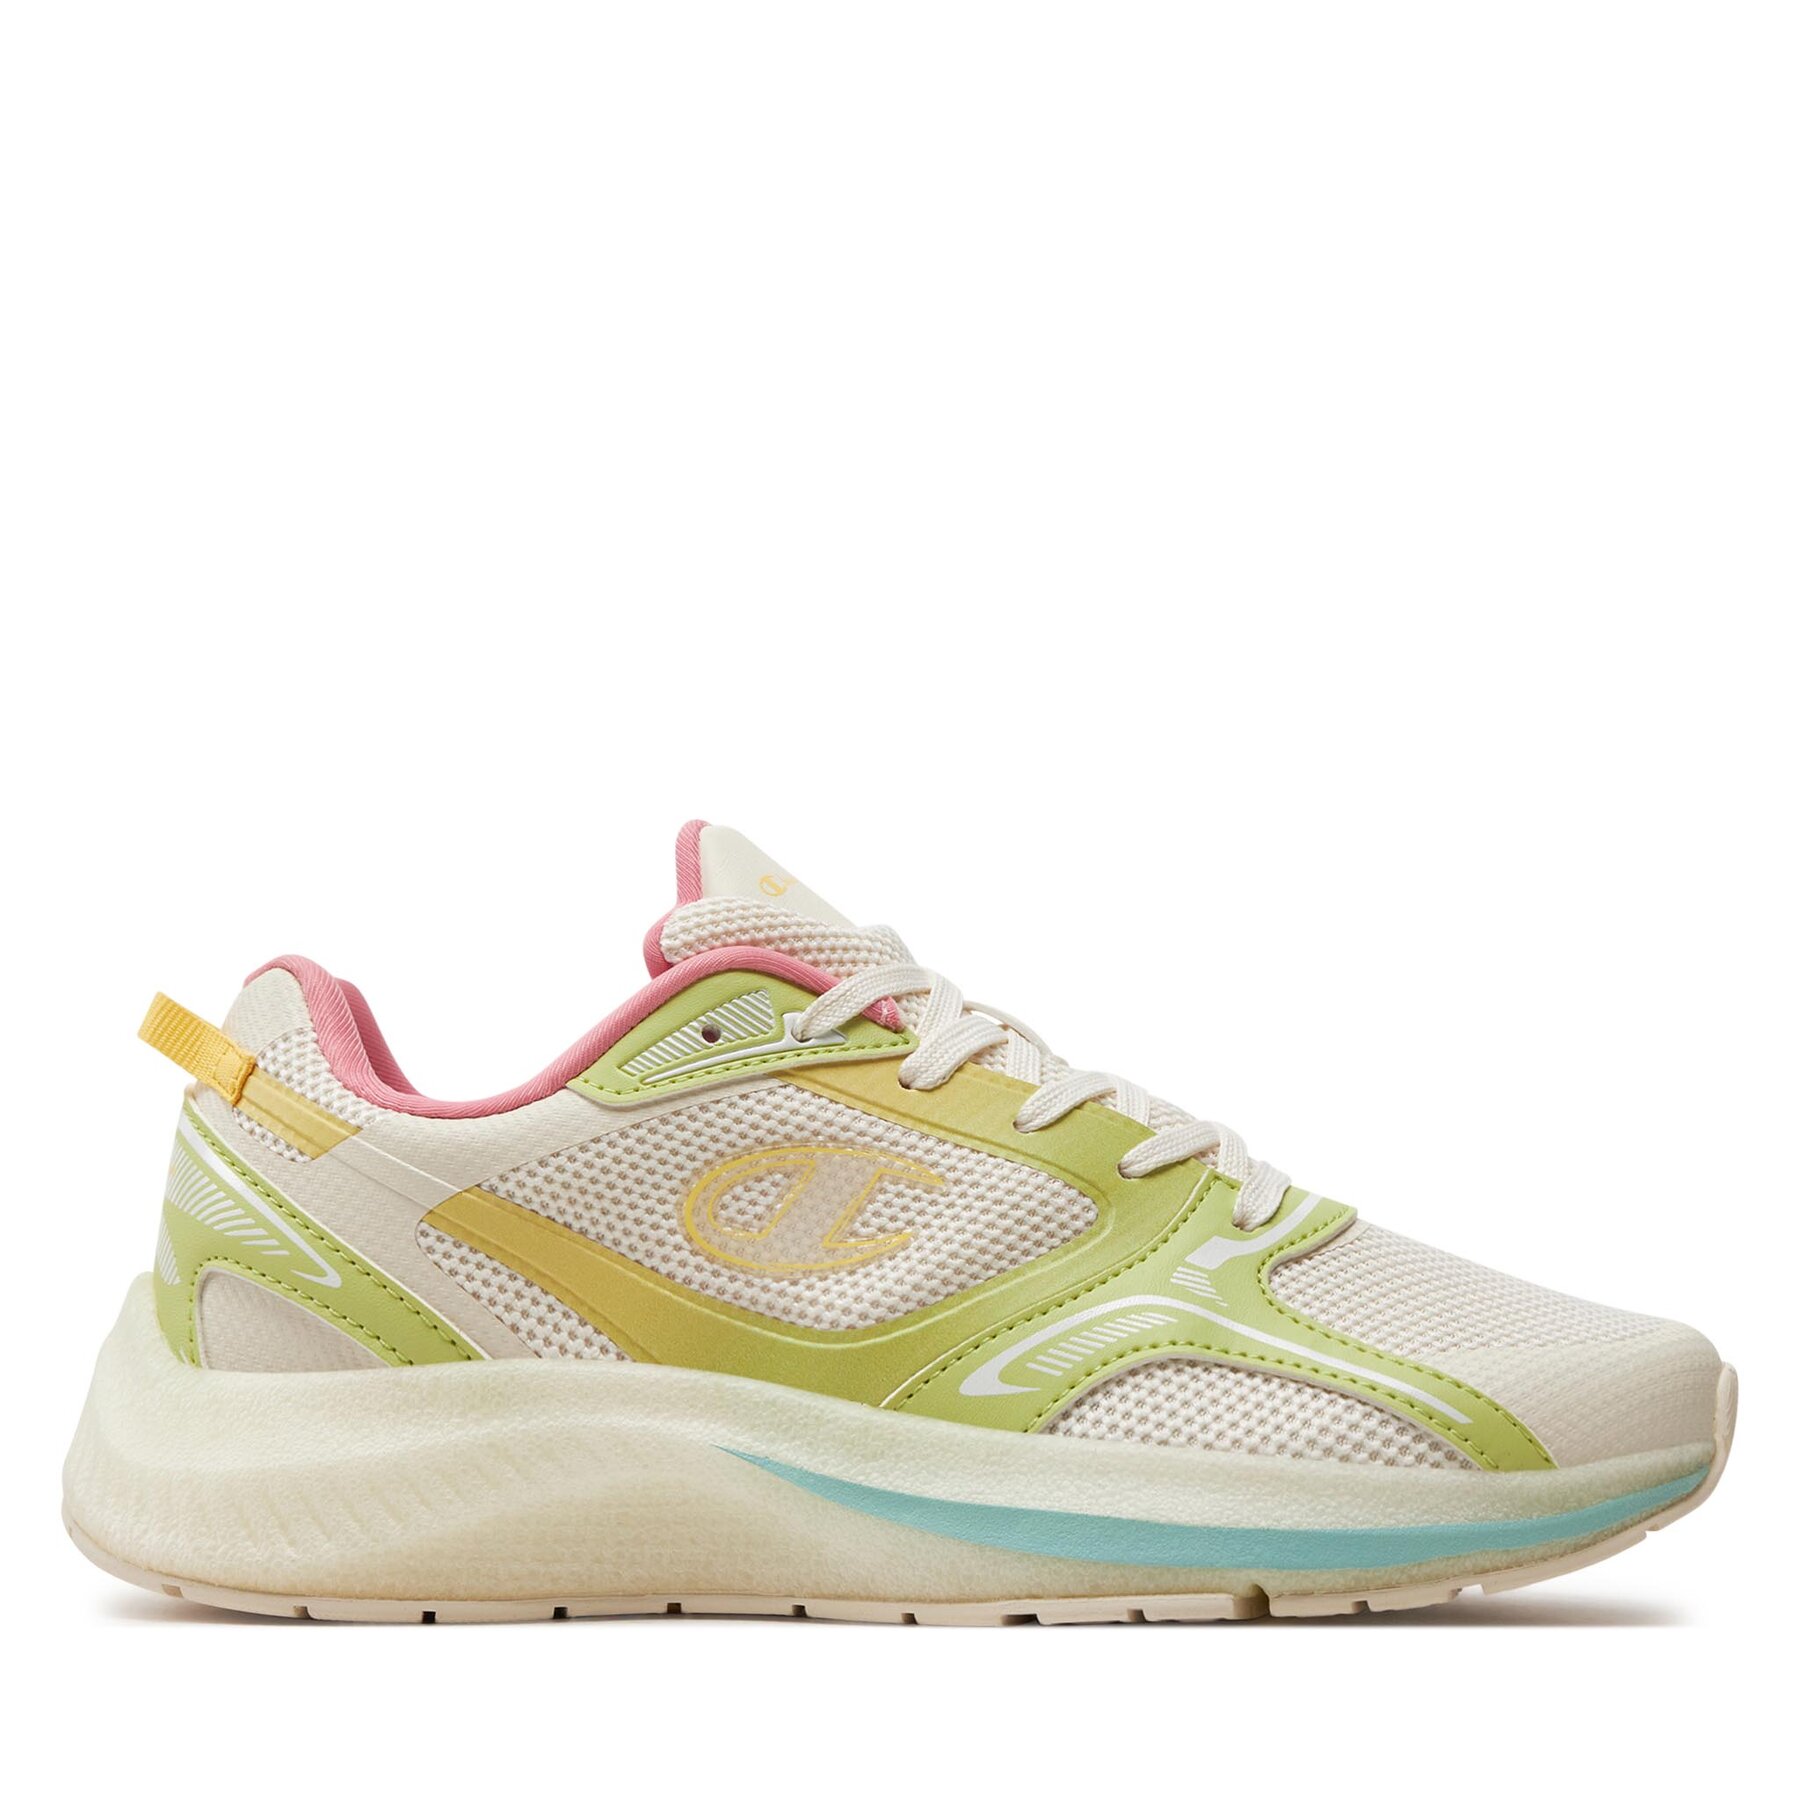 Sneakers Champion Vibe Low Cut Shoe S11672-CHA-YS015 Sand/Green/Yellow/Pink von Champion